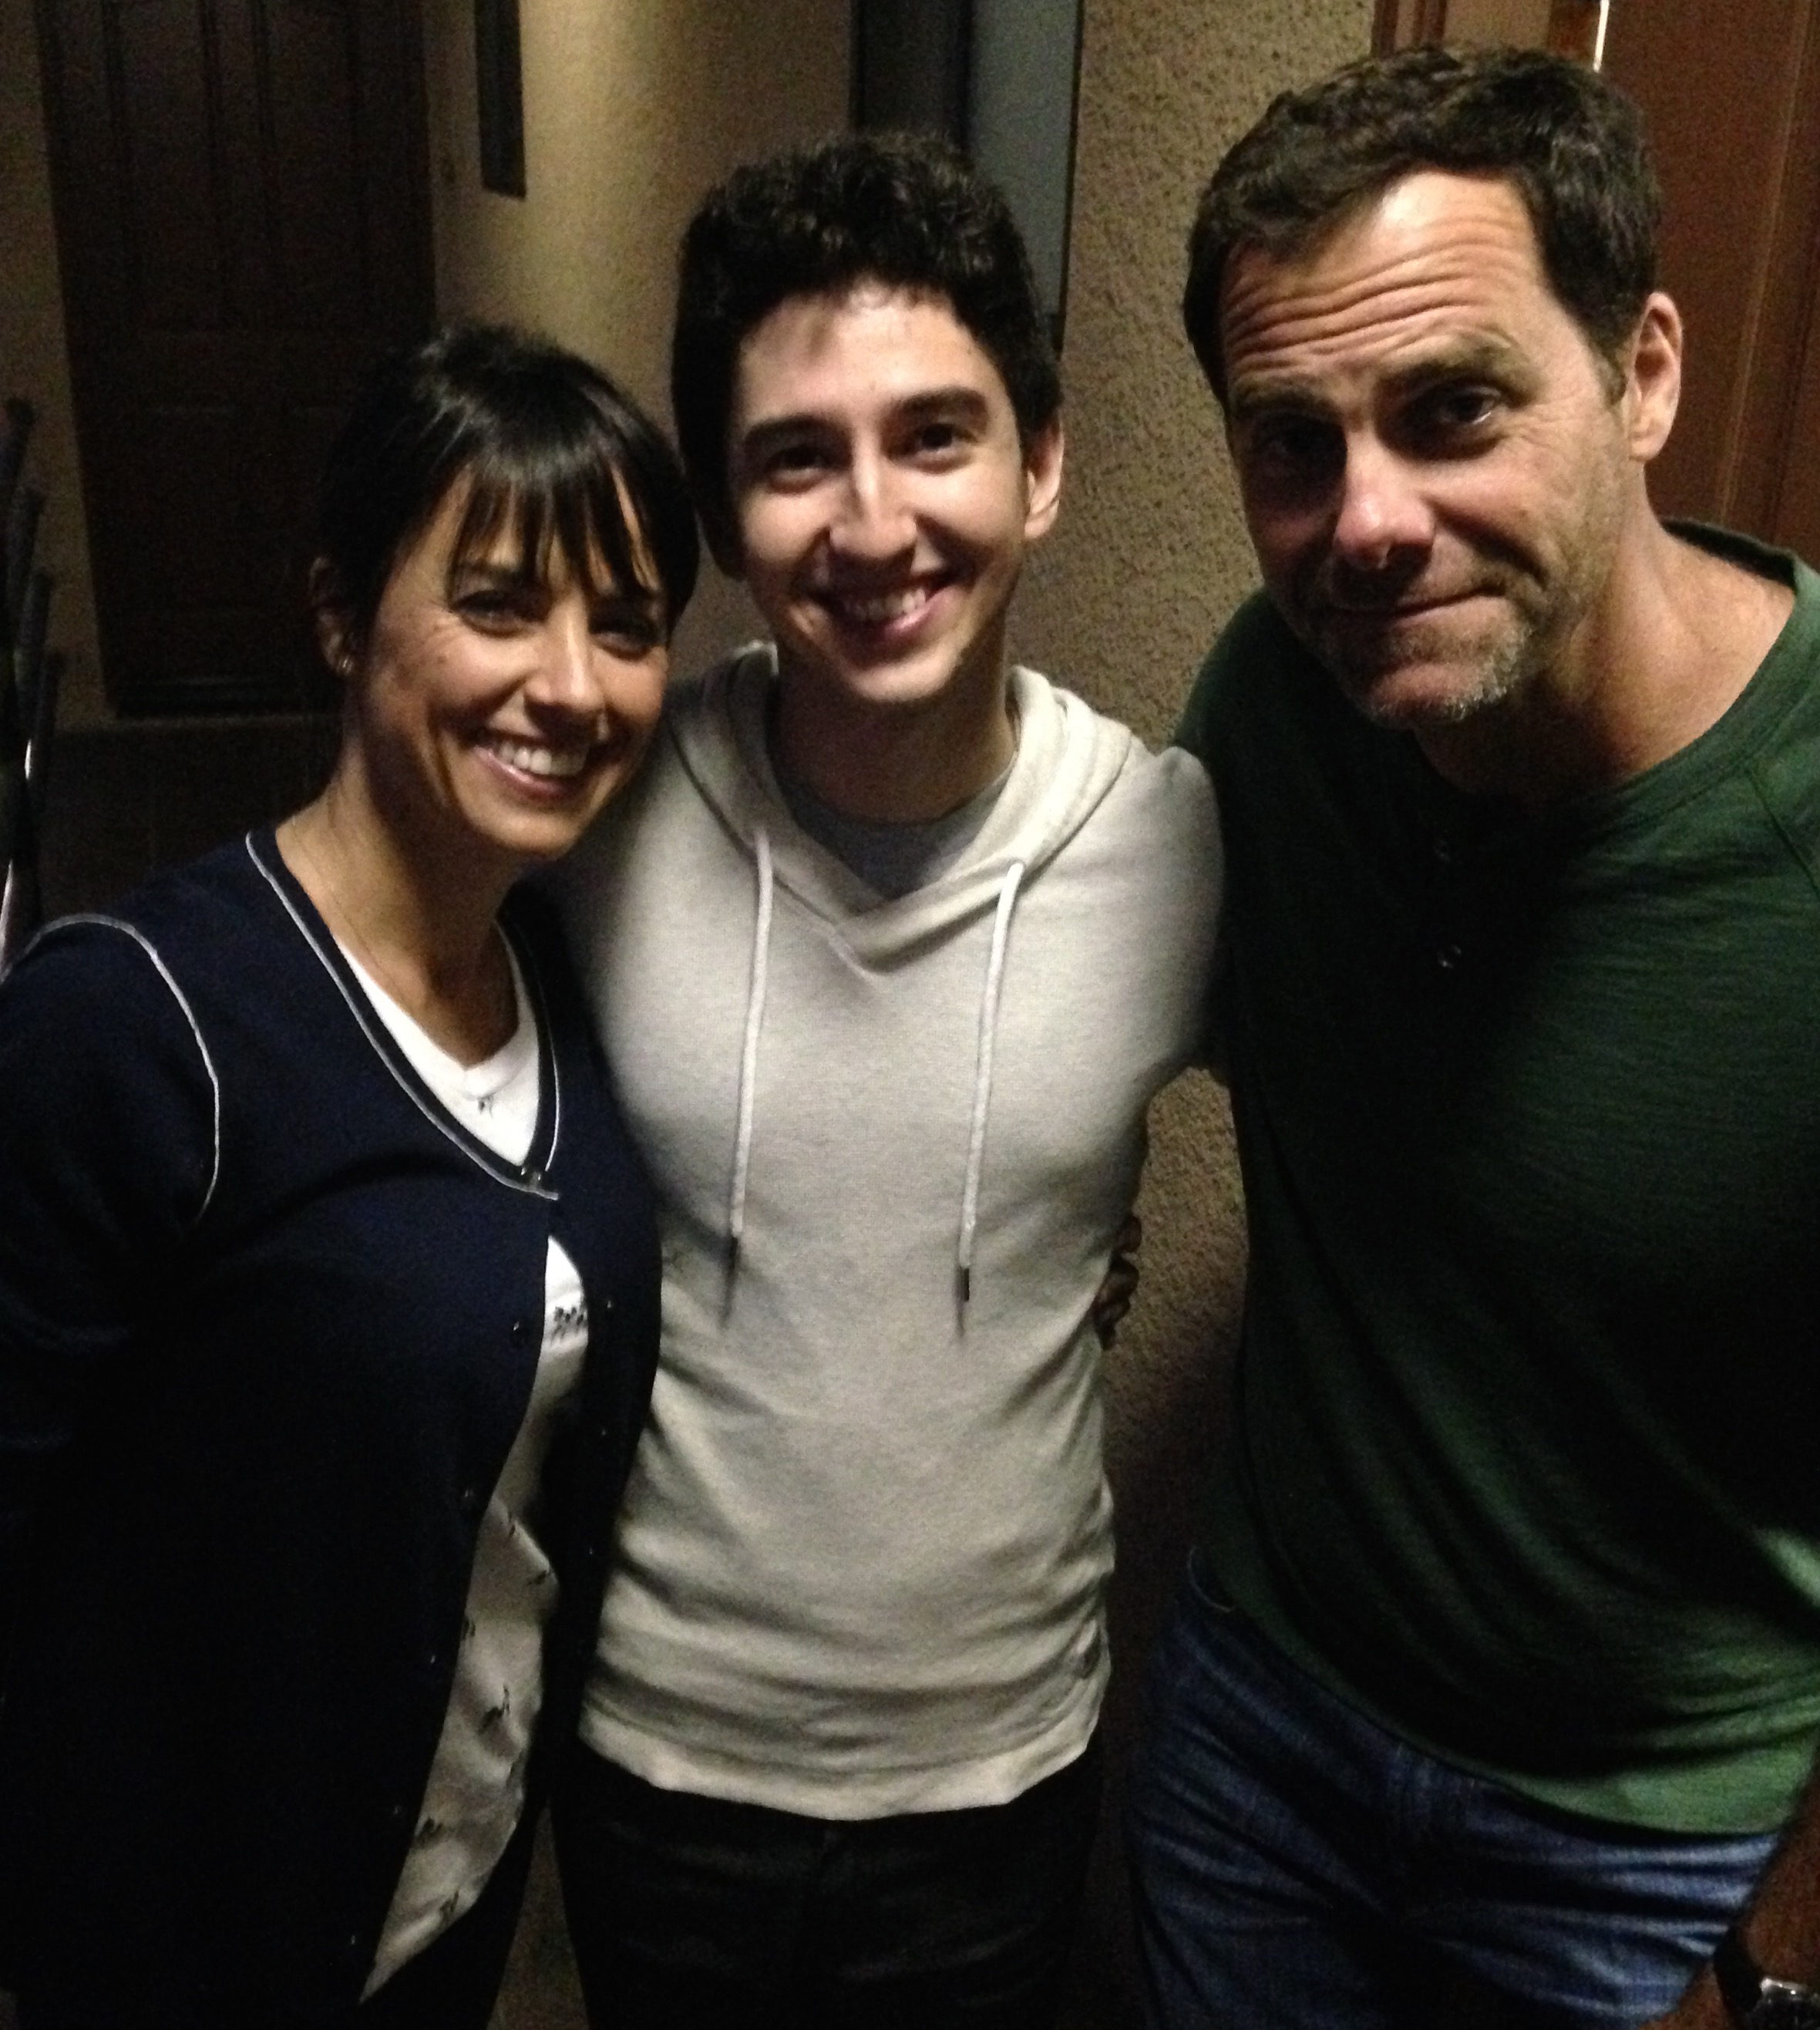 Constance Zimmer, Brendan Calton, and Andy Buckley on the set of The Half of It (2015)